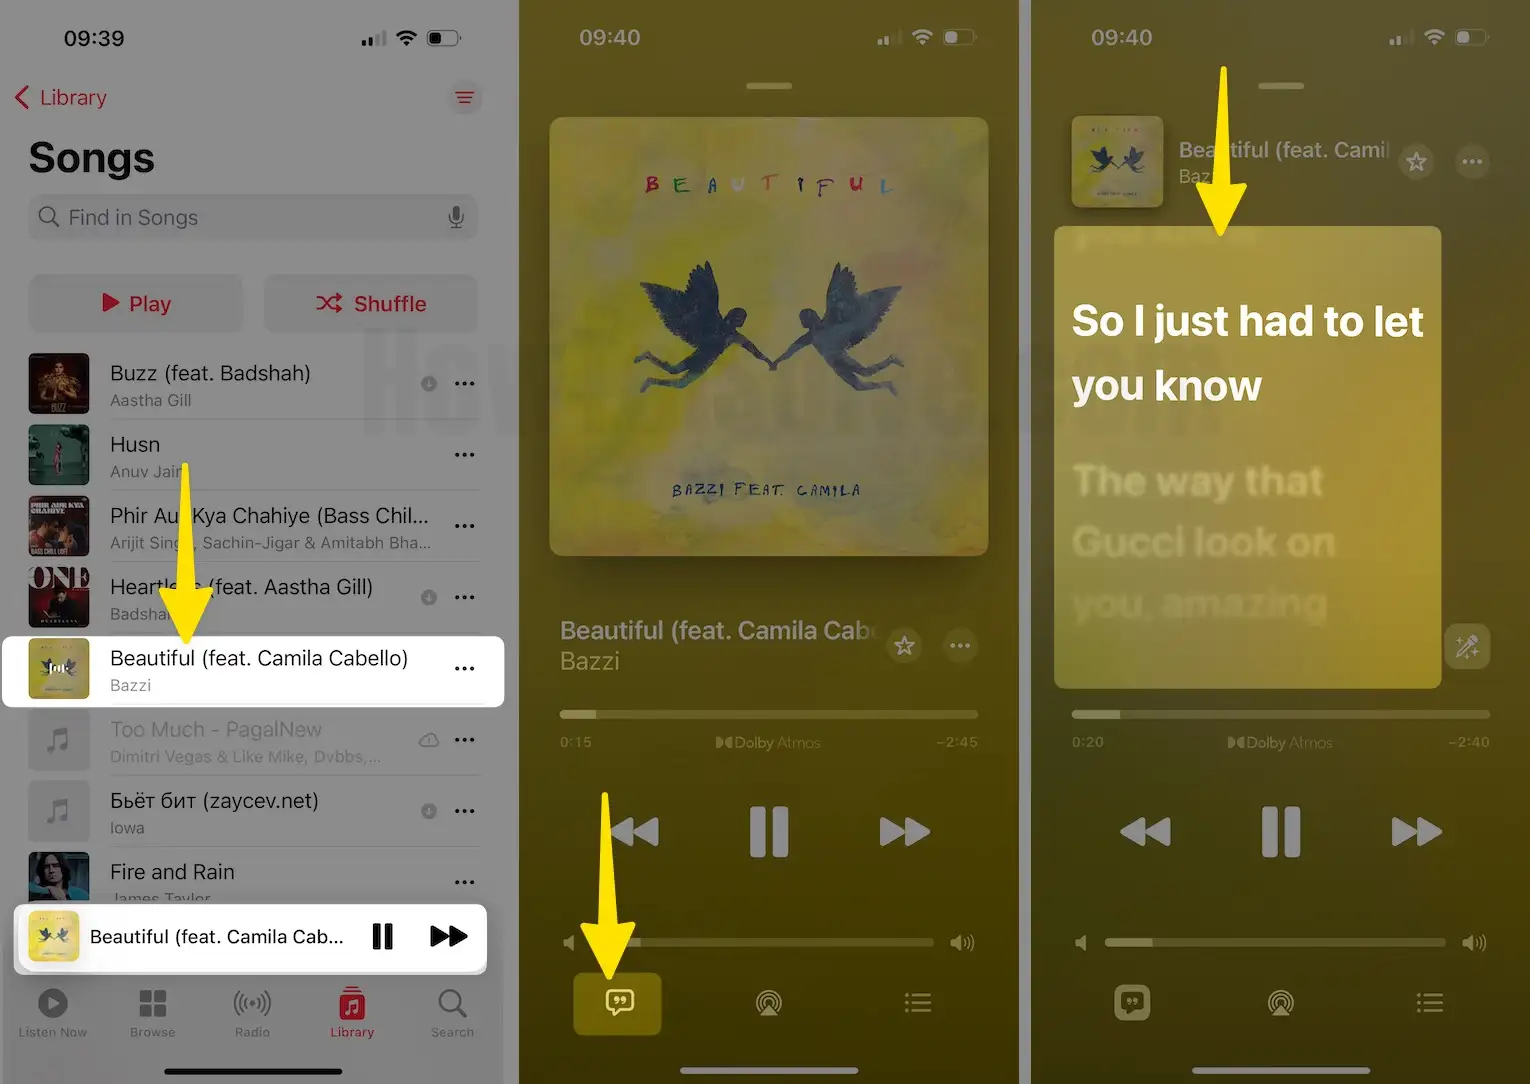 Tap on Desired Song to Play Click on Lyrics icon see the synced lyrics moving as the song continues on iPhone